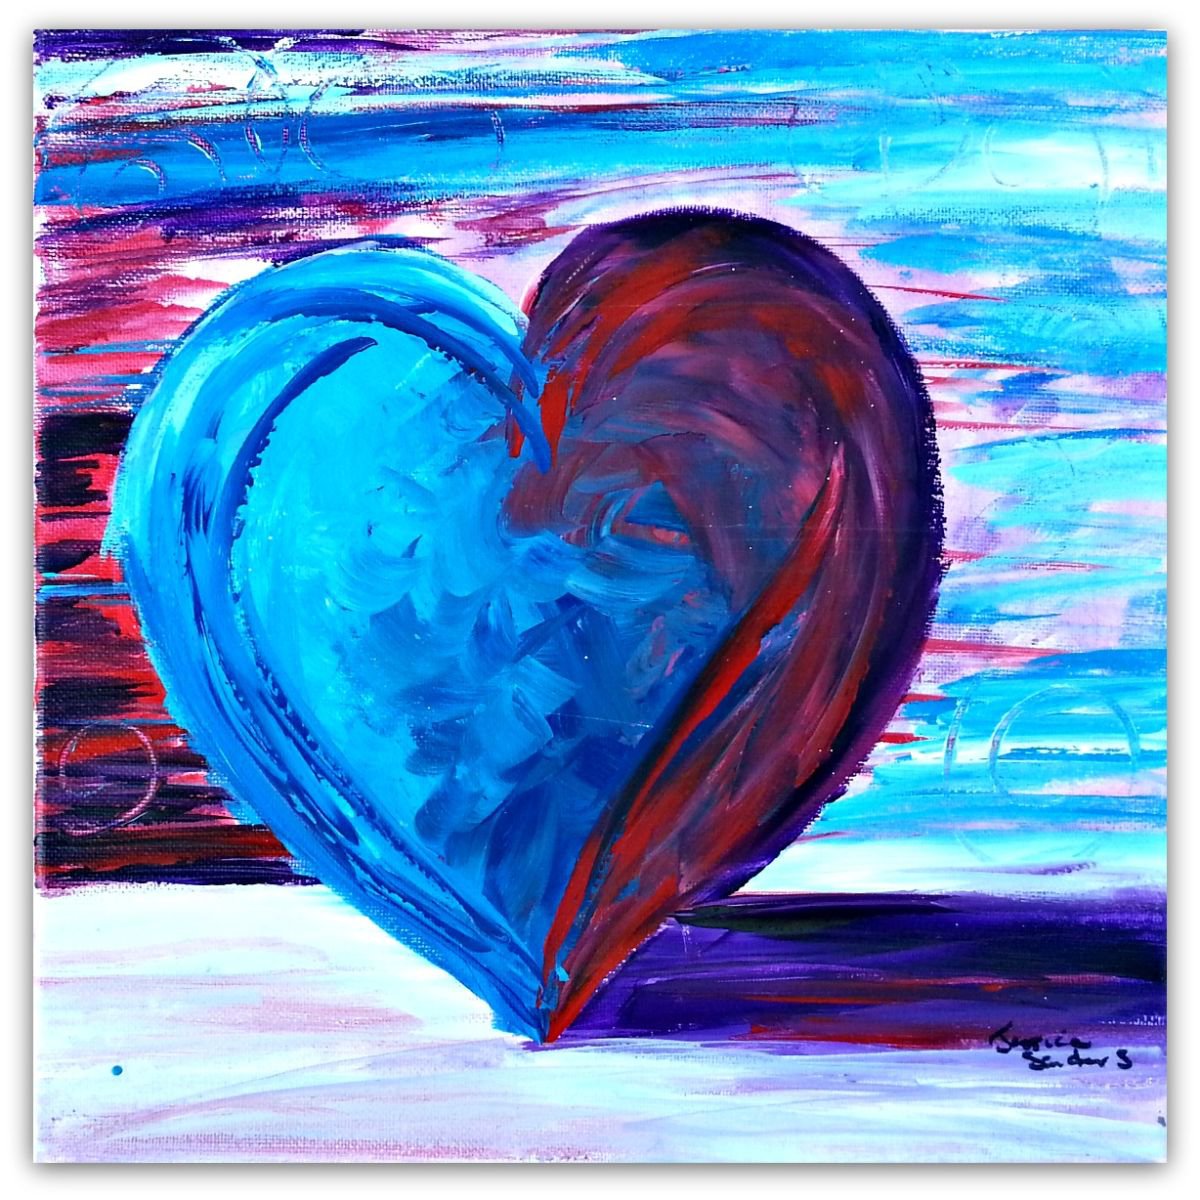 My Heart by Jessica Sanders